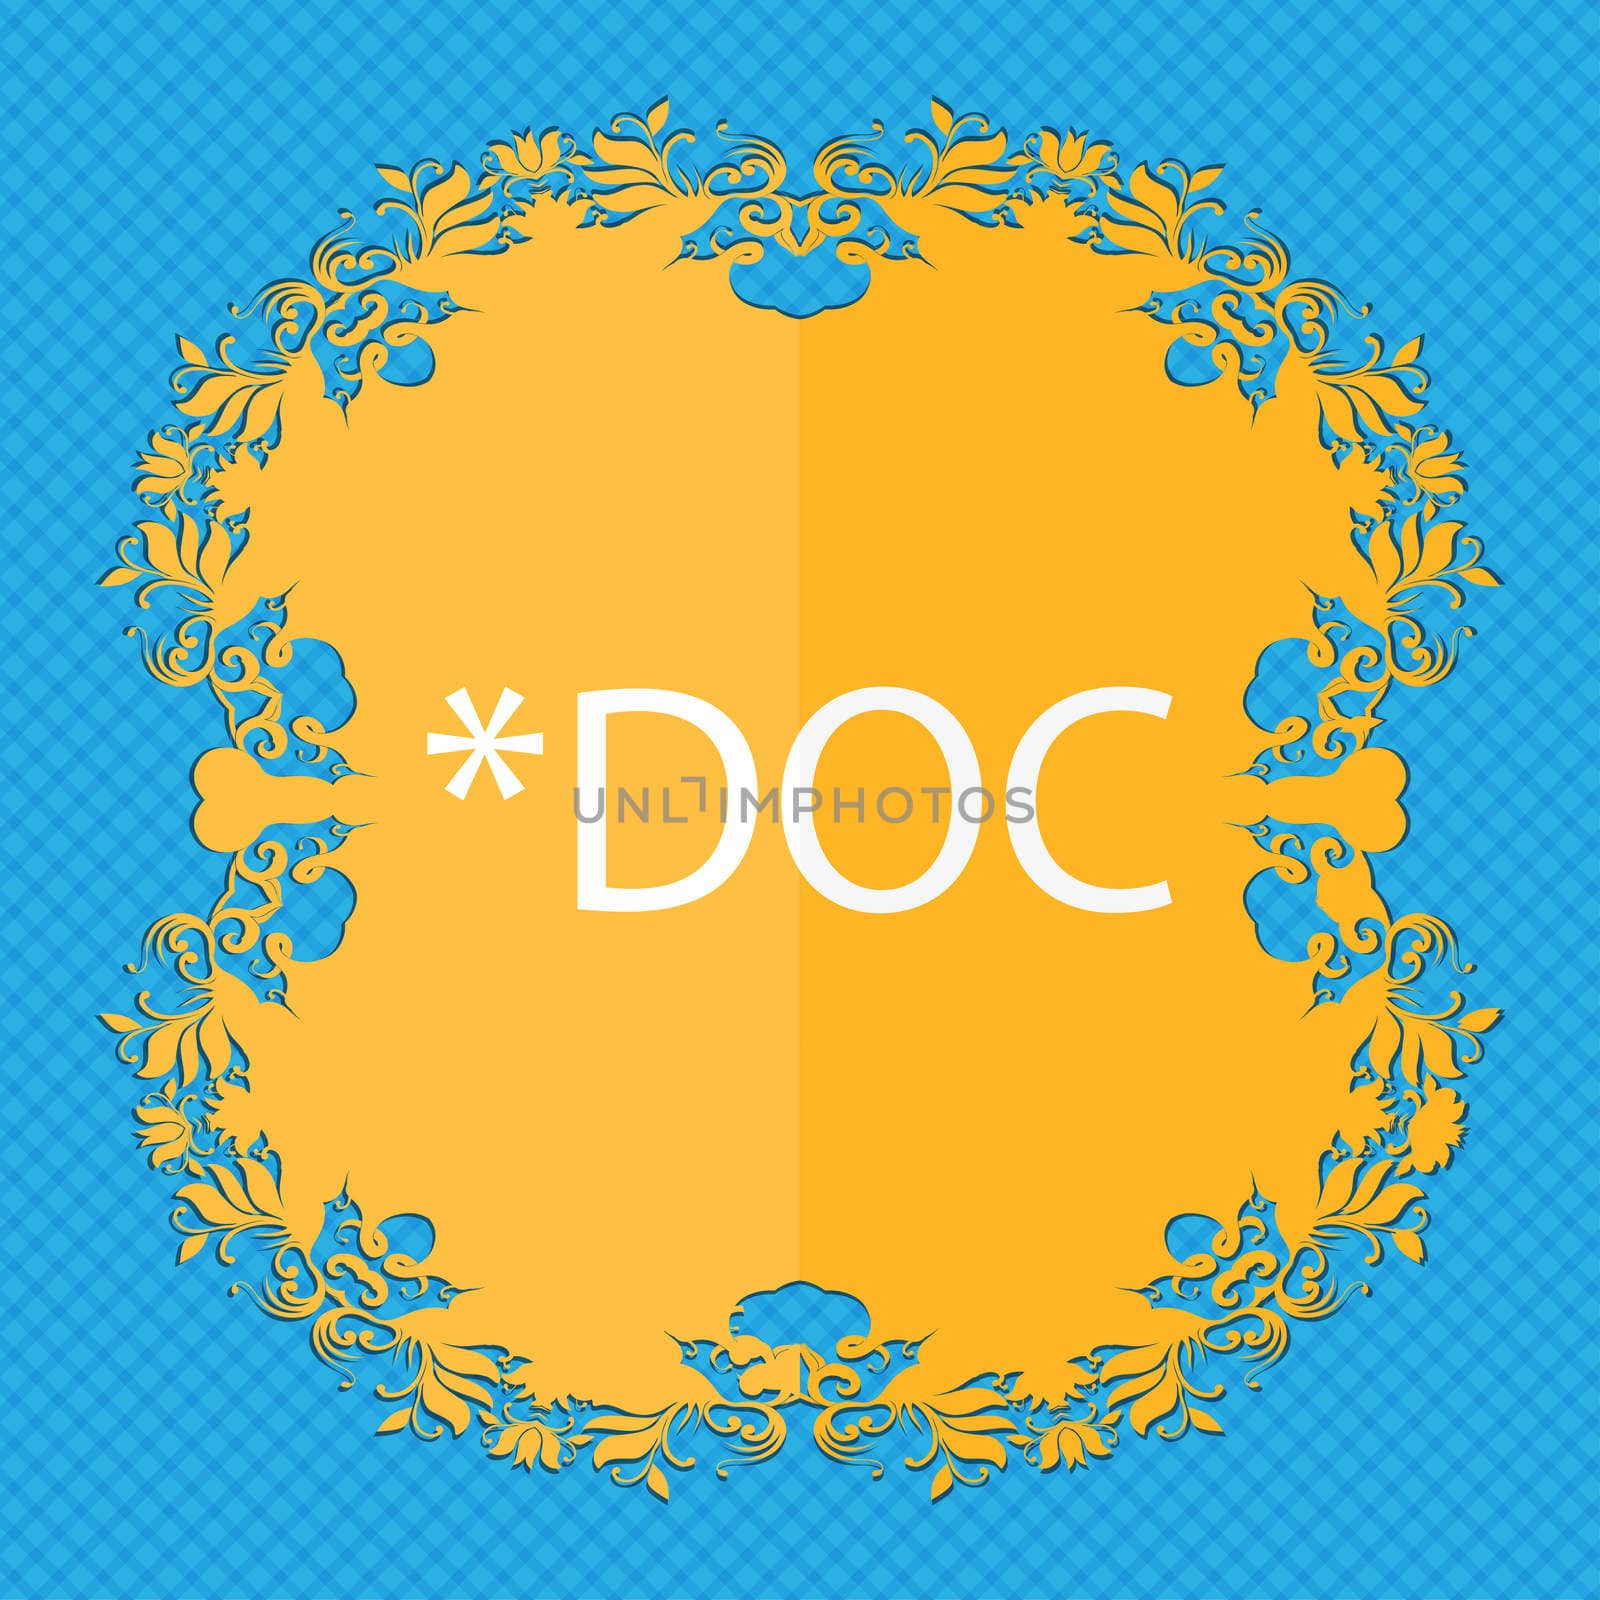 File document icon. Download doc button. Doc file extension symbol. Floral flat design on a blue abstract background with place for your text.  by serhii_lohvyniuk